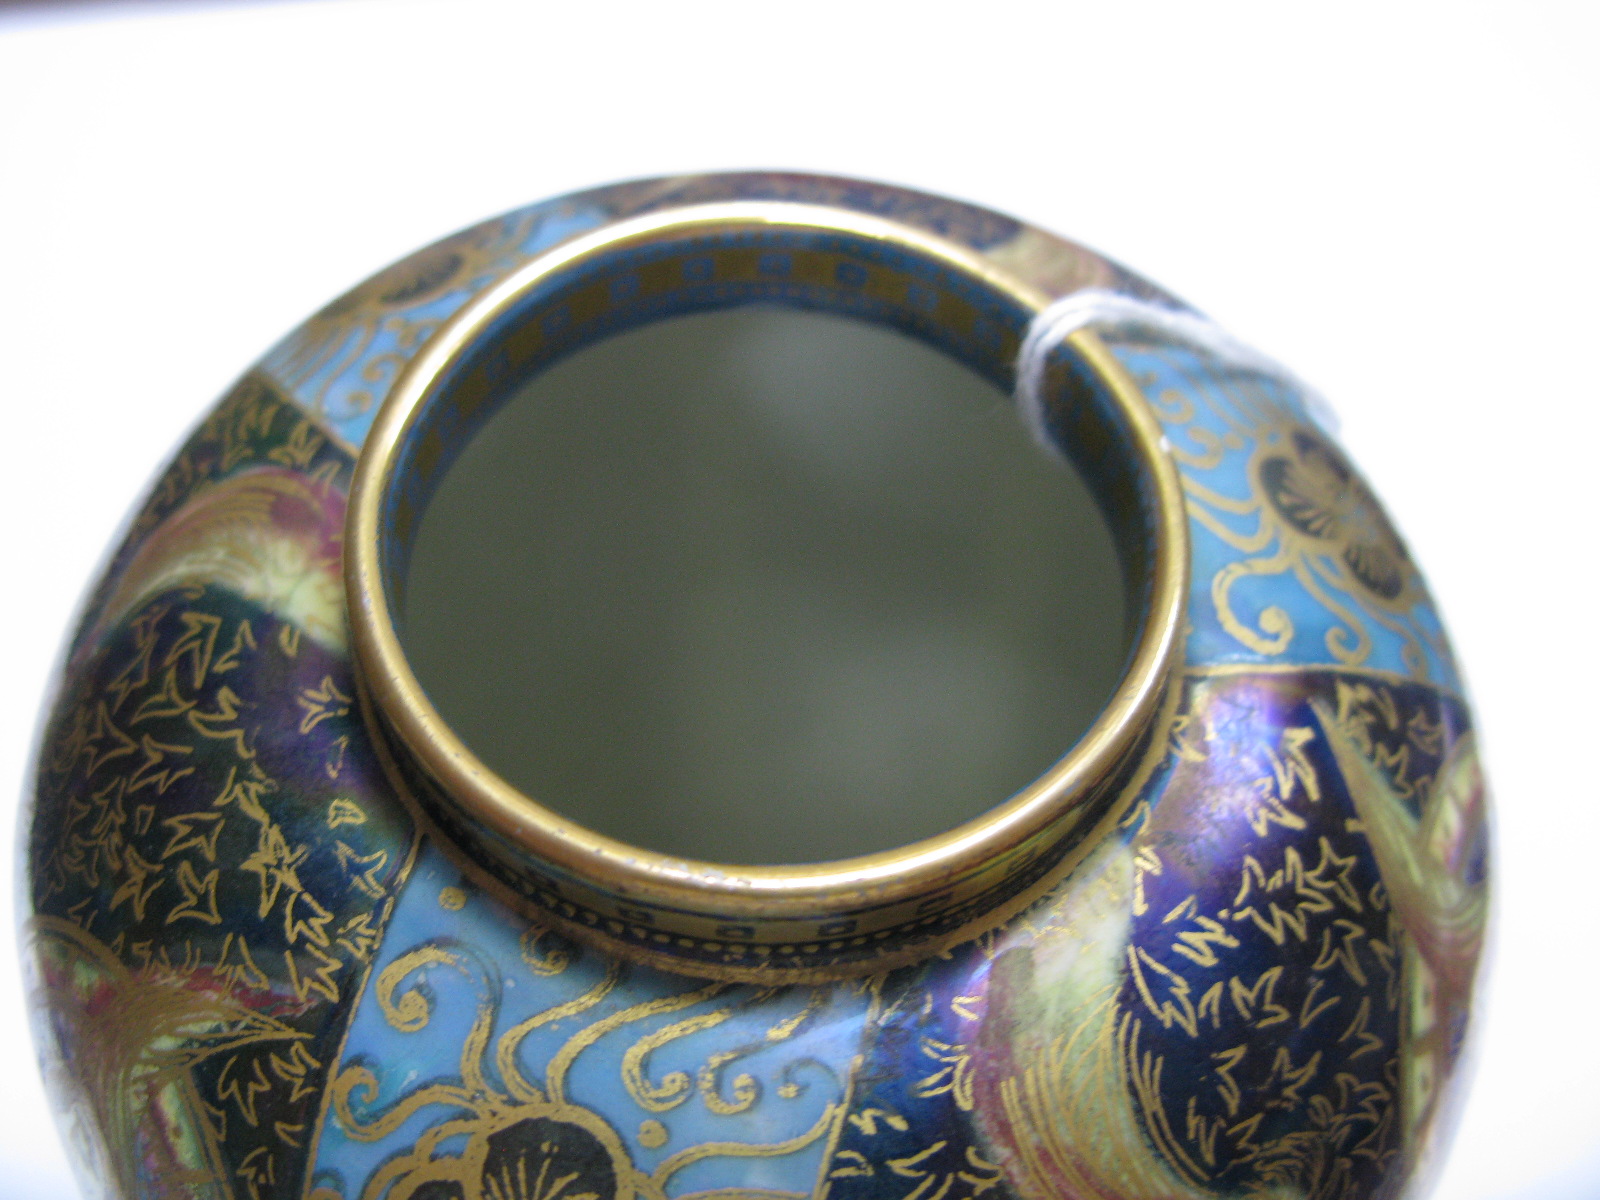 A Wedgwood Fairyland Lustre Porcelain Vase, of ovoid form, designed by Daisy Makeig-Jones with - Image 4 of 5